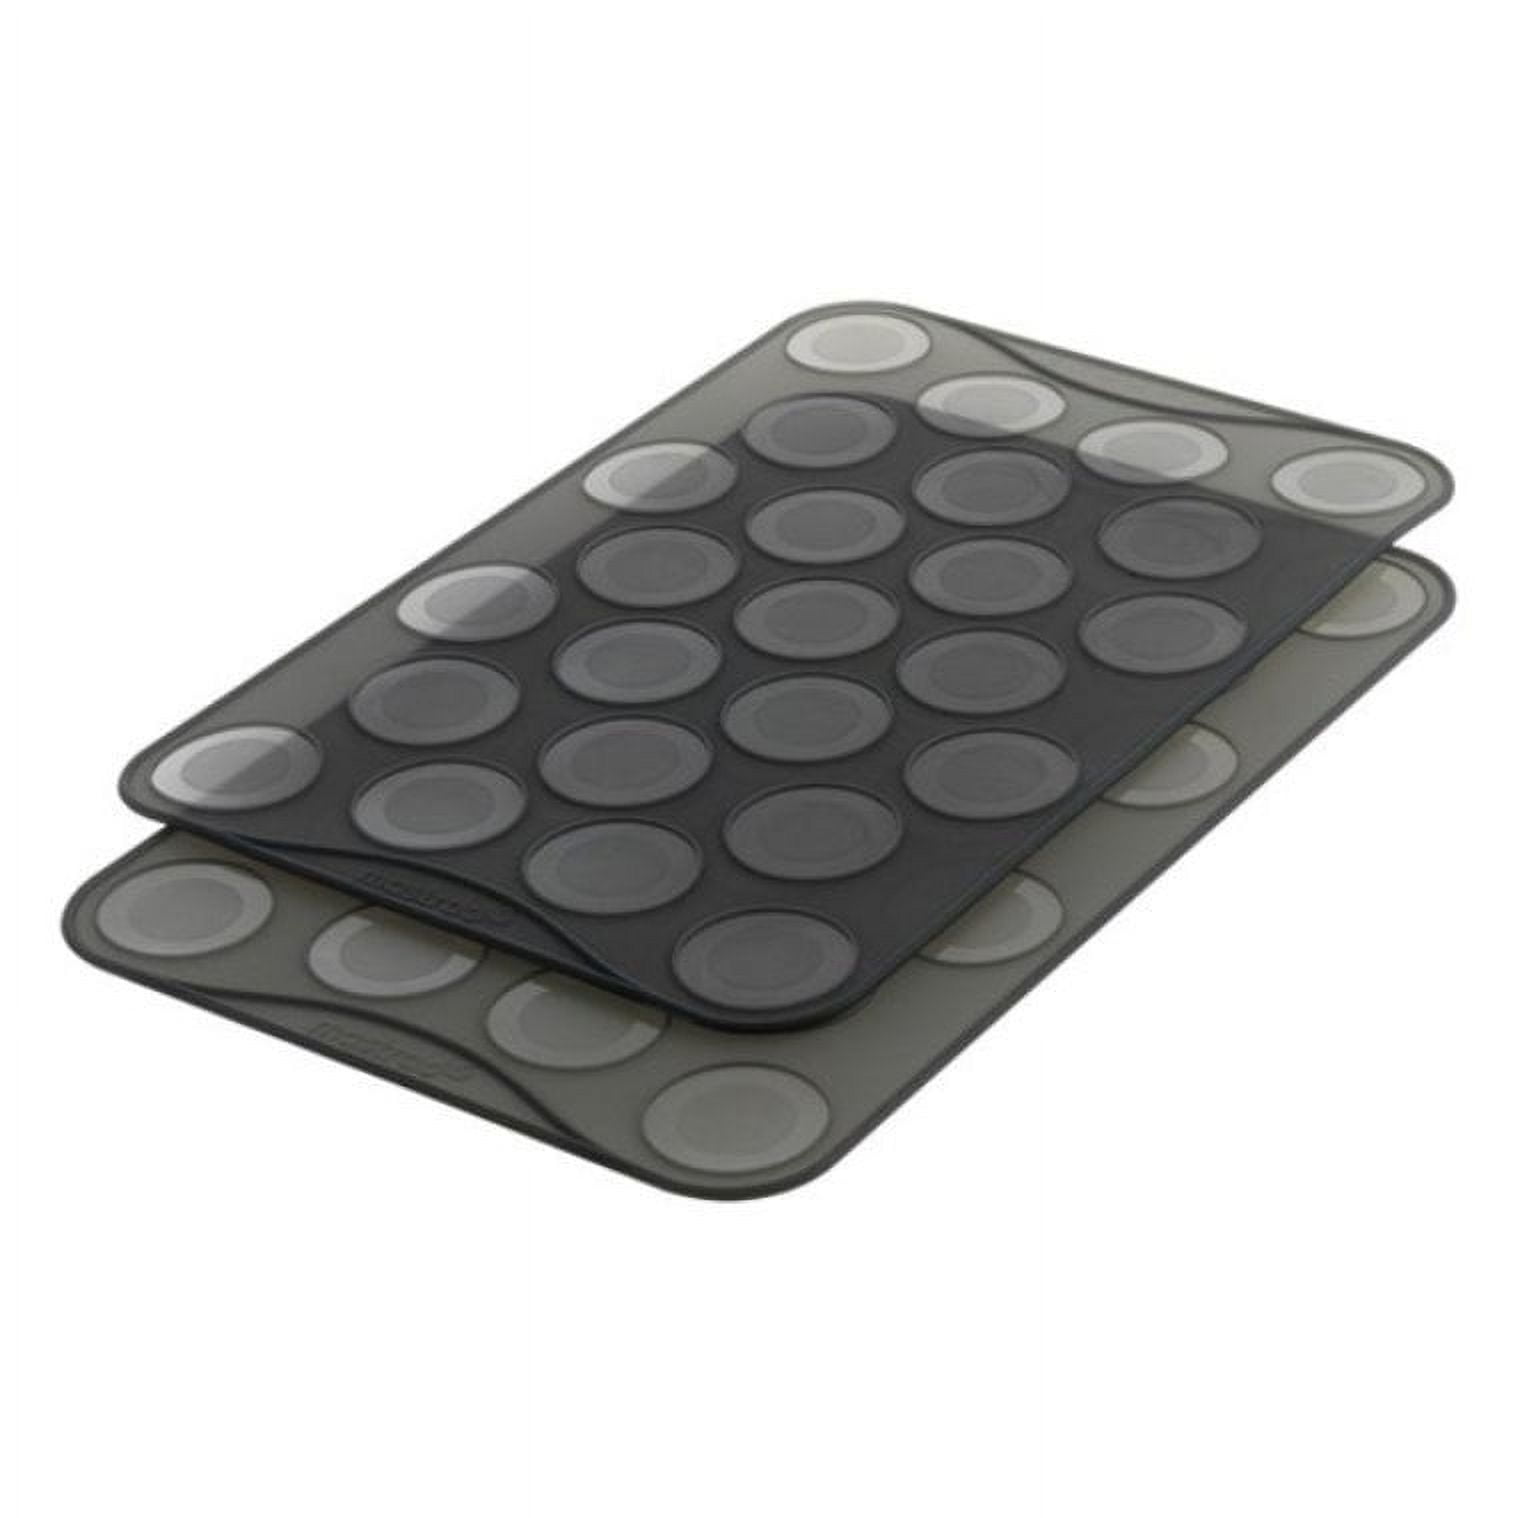 Bluedrop Baking Sheets | Silicone Macarons Baking Mat & PTFE Oven Liner 1 Pcs Each | Non Stick Baking Mats Dehydrator Sheets Pack of 2